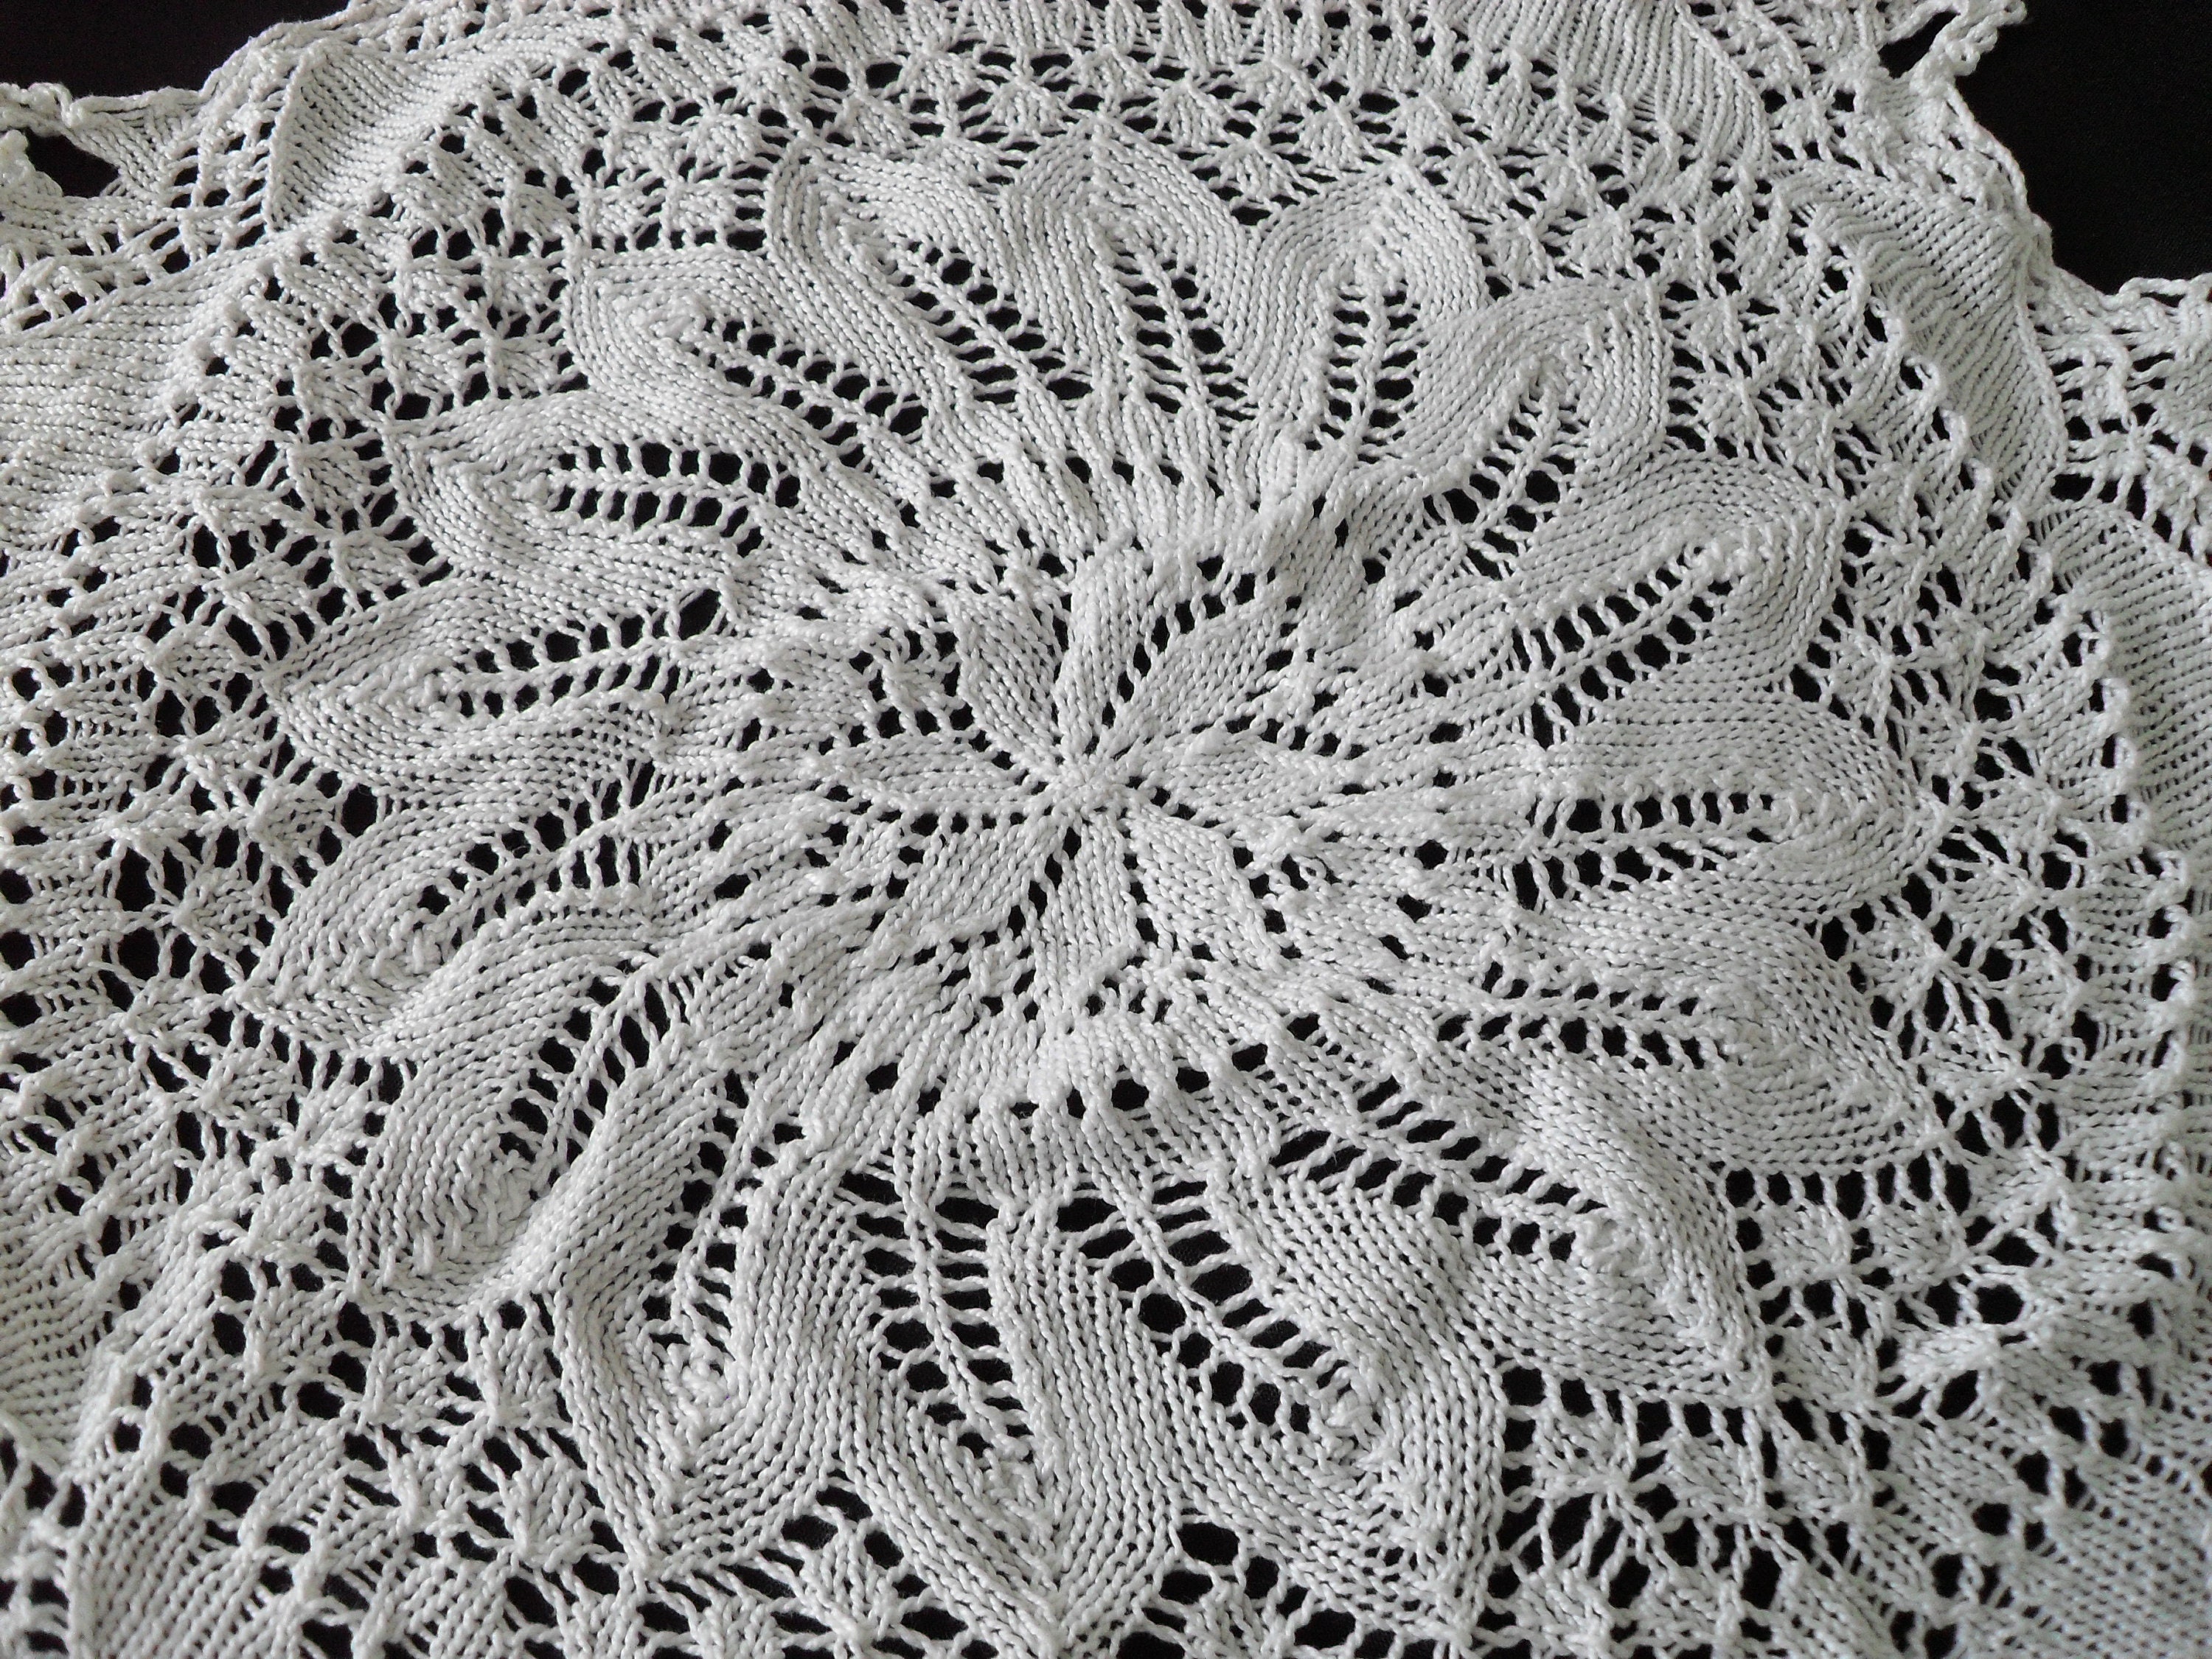 6 Pieces 10" Embroidery Handmade Rhine Stone Doily Doilies Square White Silver 